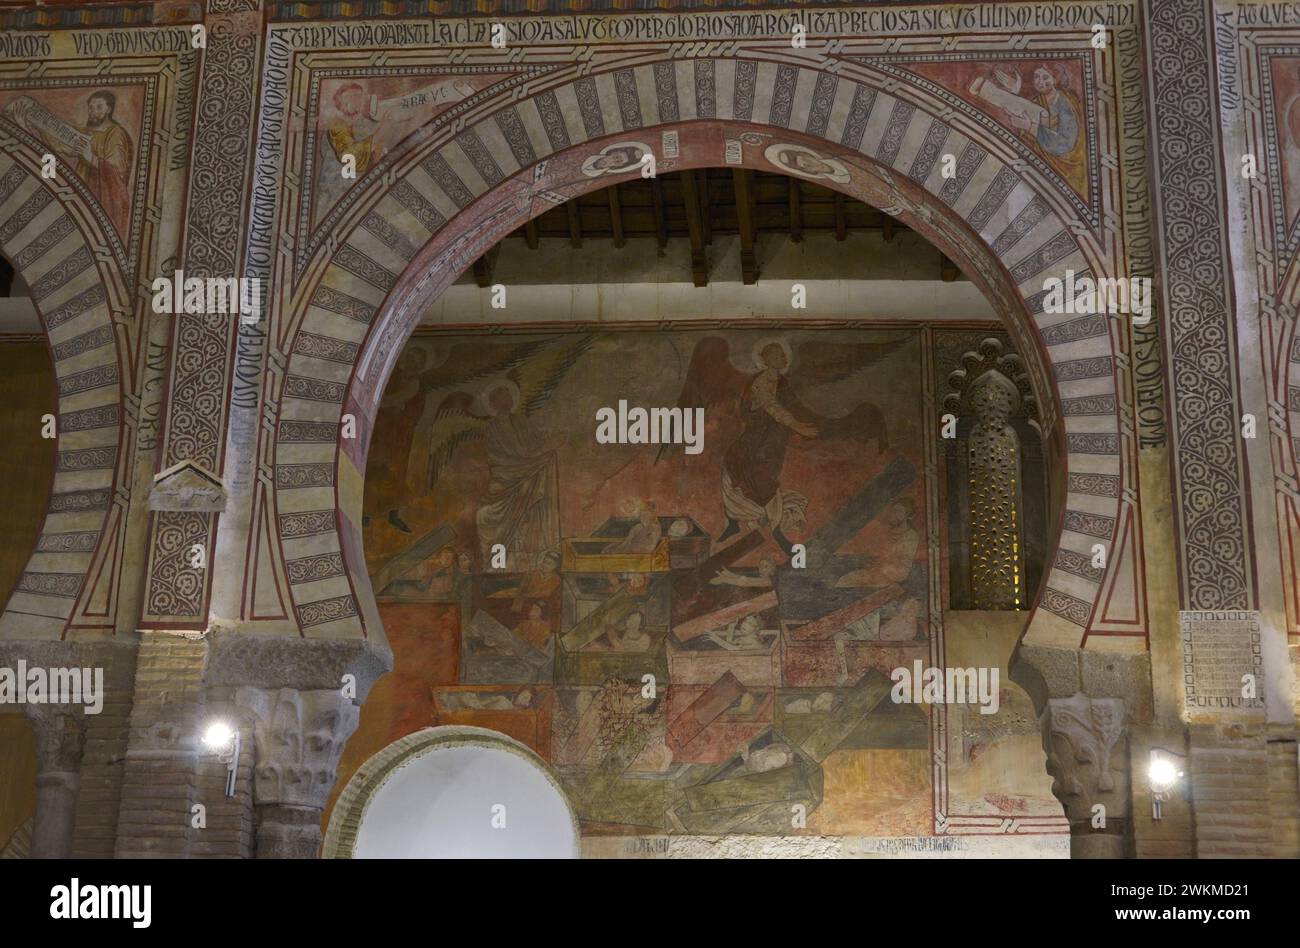 Spain, Toledo. Church of San Román. Built in Mudejar style in the 13th century. Paintings on the southern wall depicting the Resurrection of the Dead. Angels announcing the arrival of the Last Judgment. Stock Photo